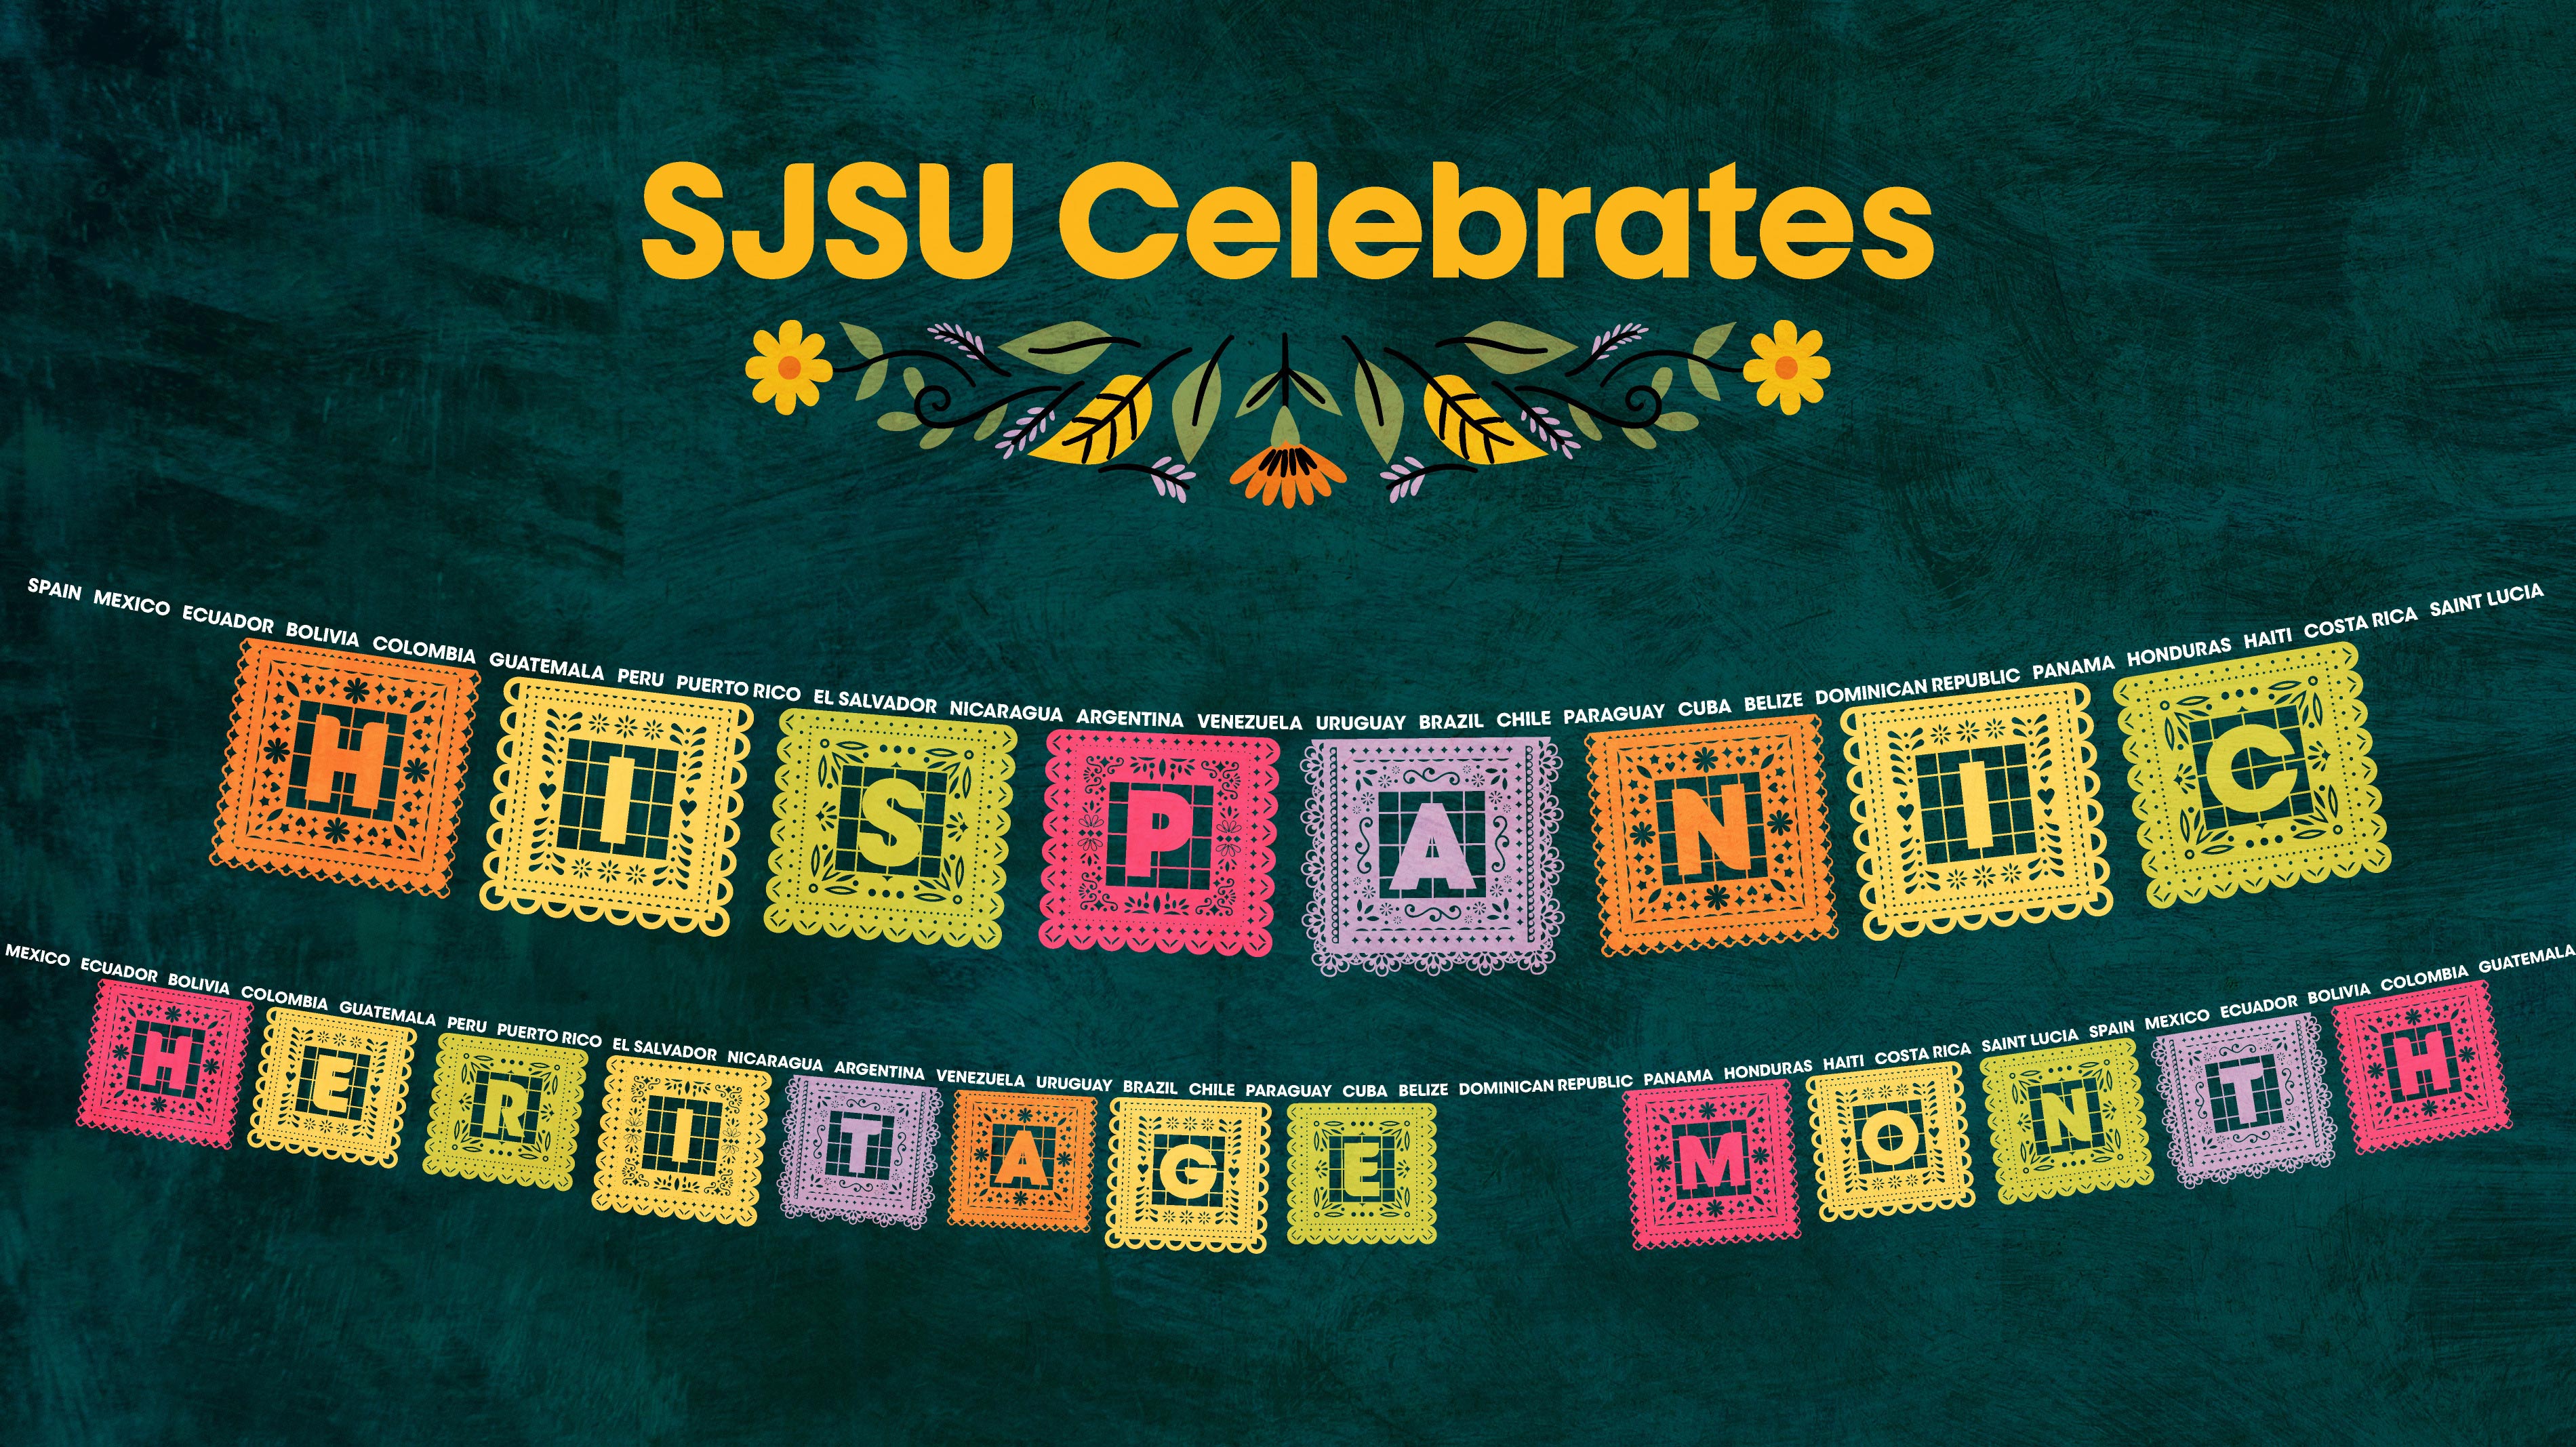 SJSU Celebrates with a string of colorful paper banners below that spell out Hispanic Heritage Month.